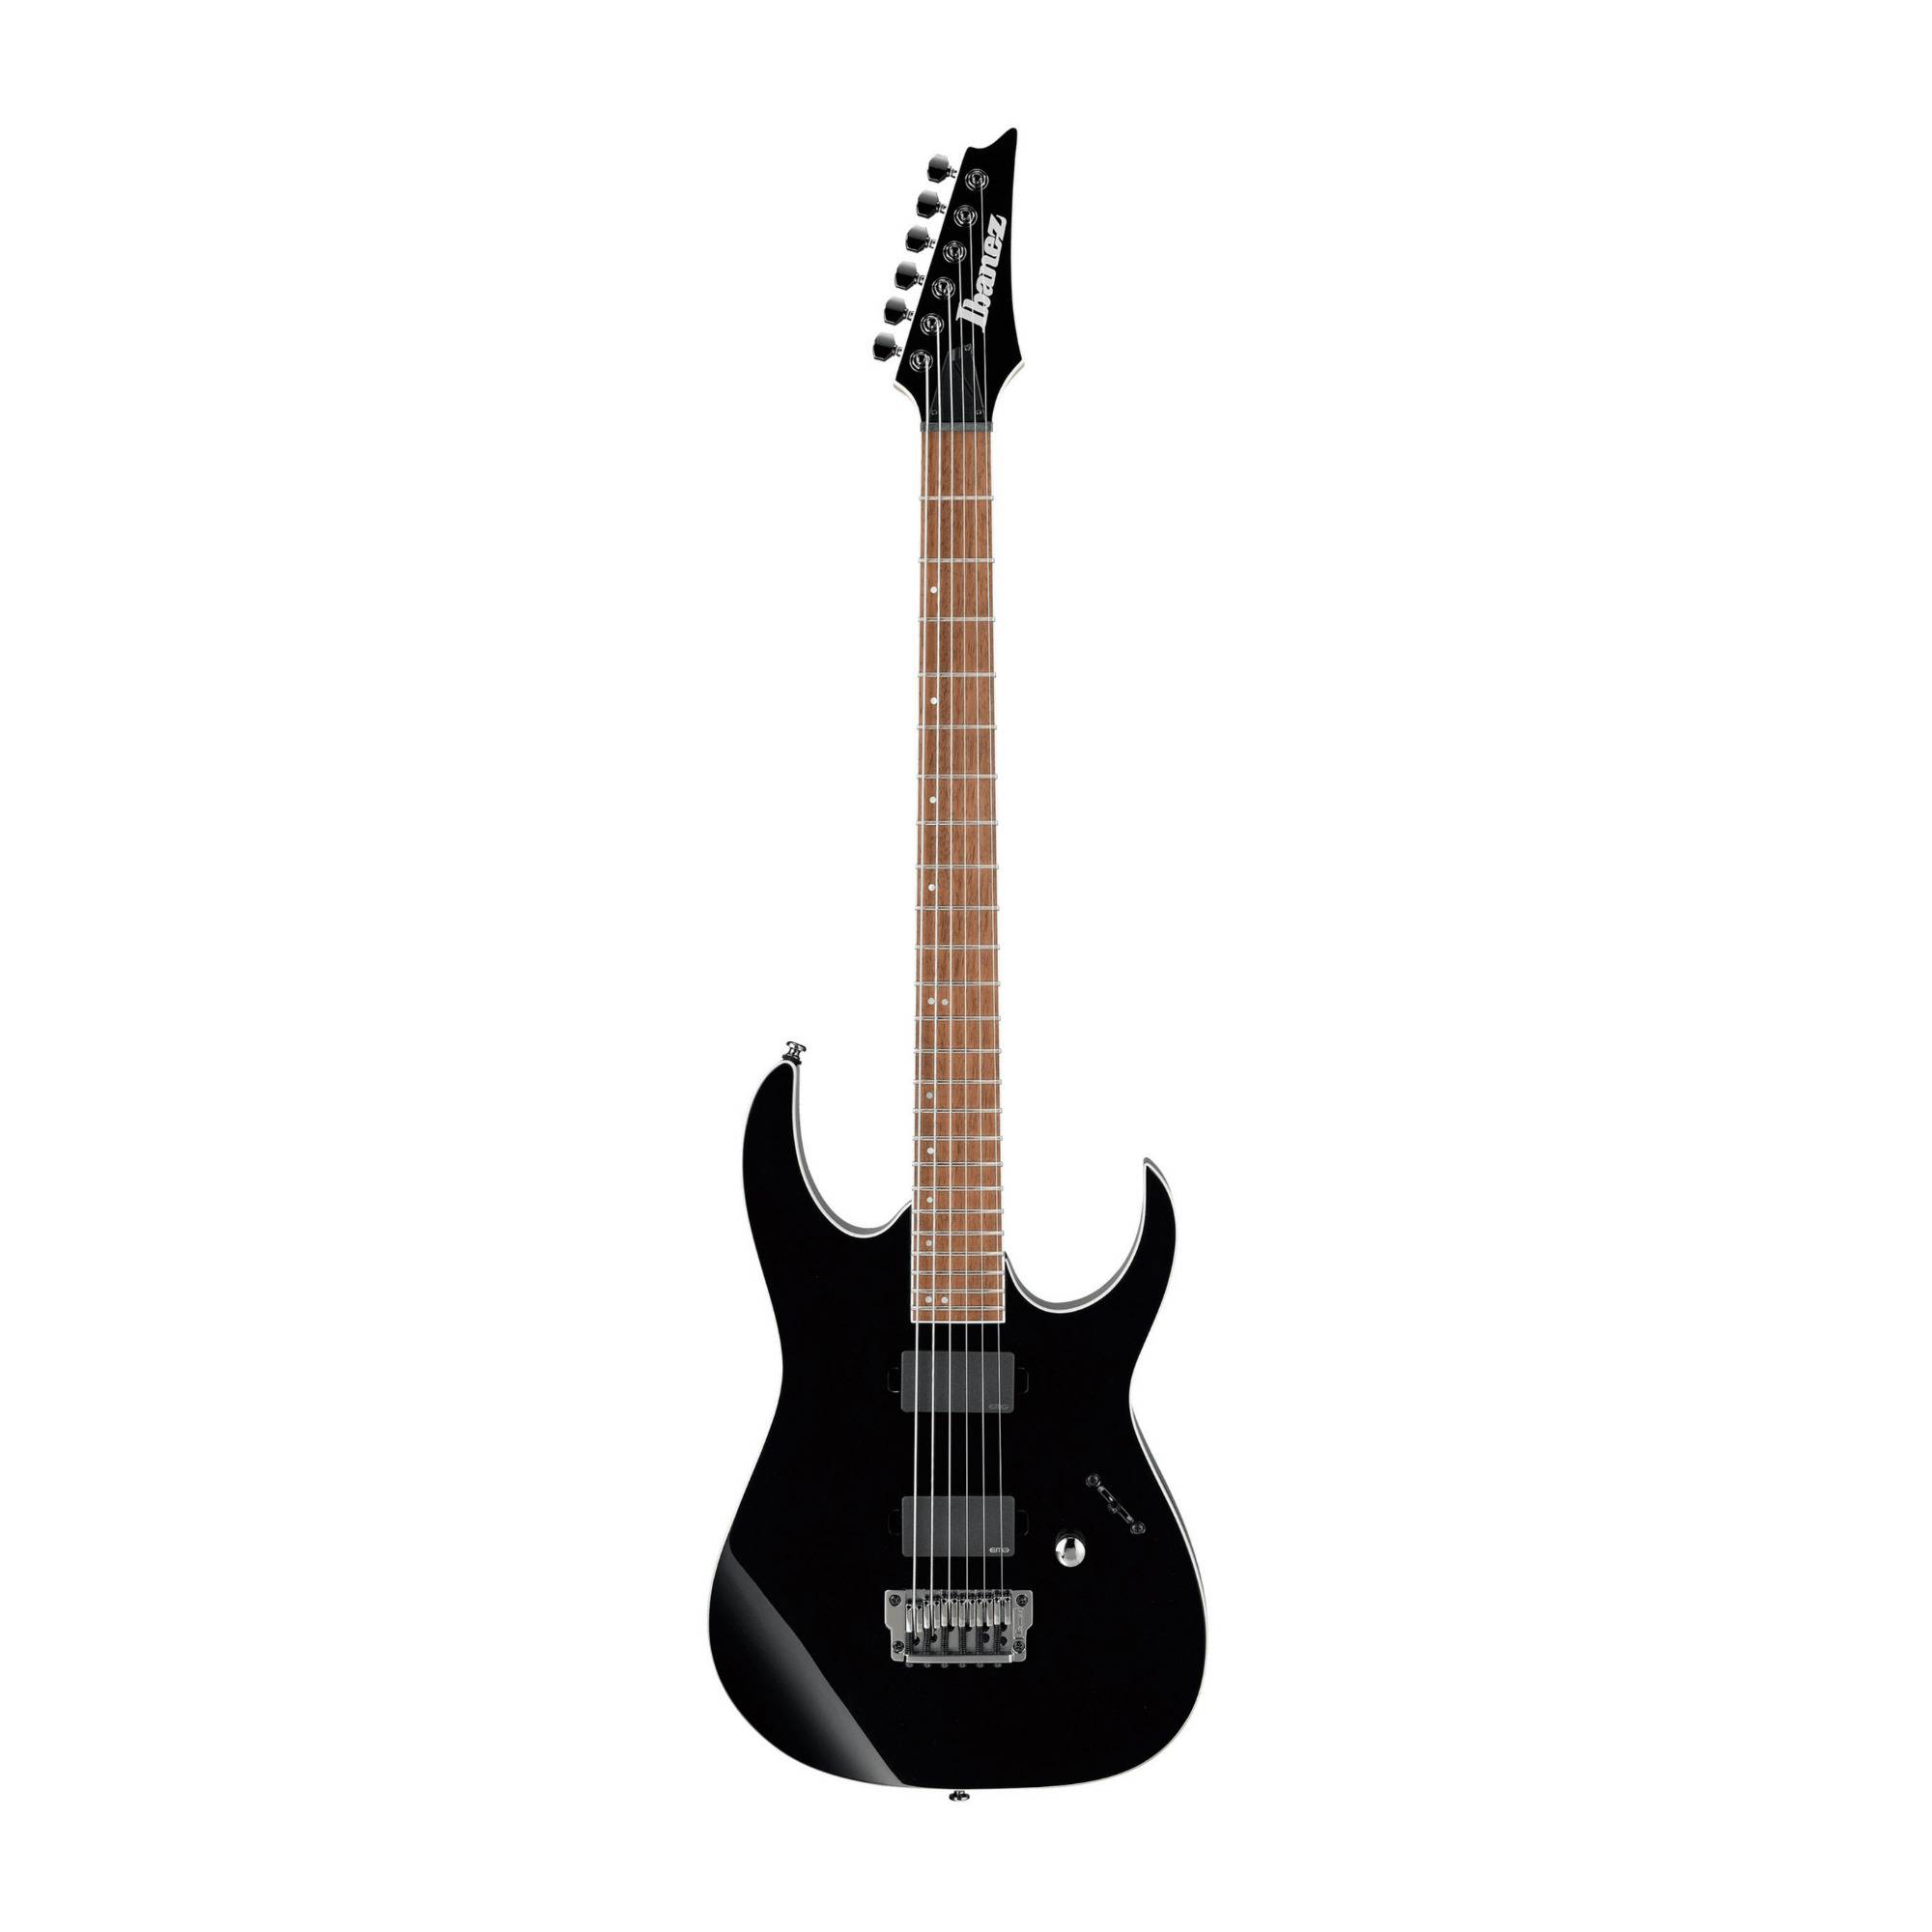 Ibanez RG Iron Label 6-String Electric Guitar (Right-Handed, Black) with Rosewood Fretboard